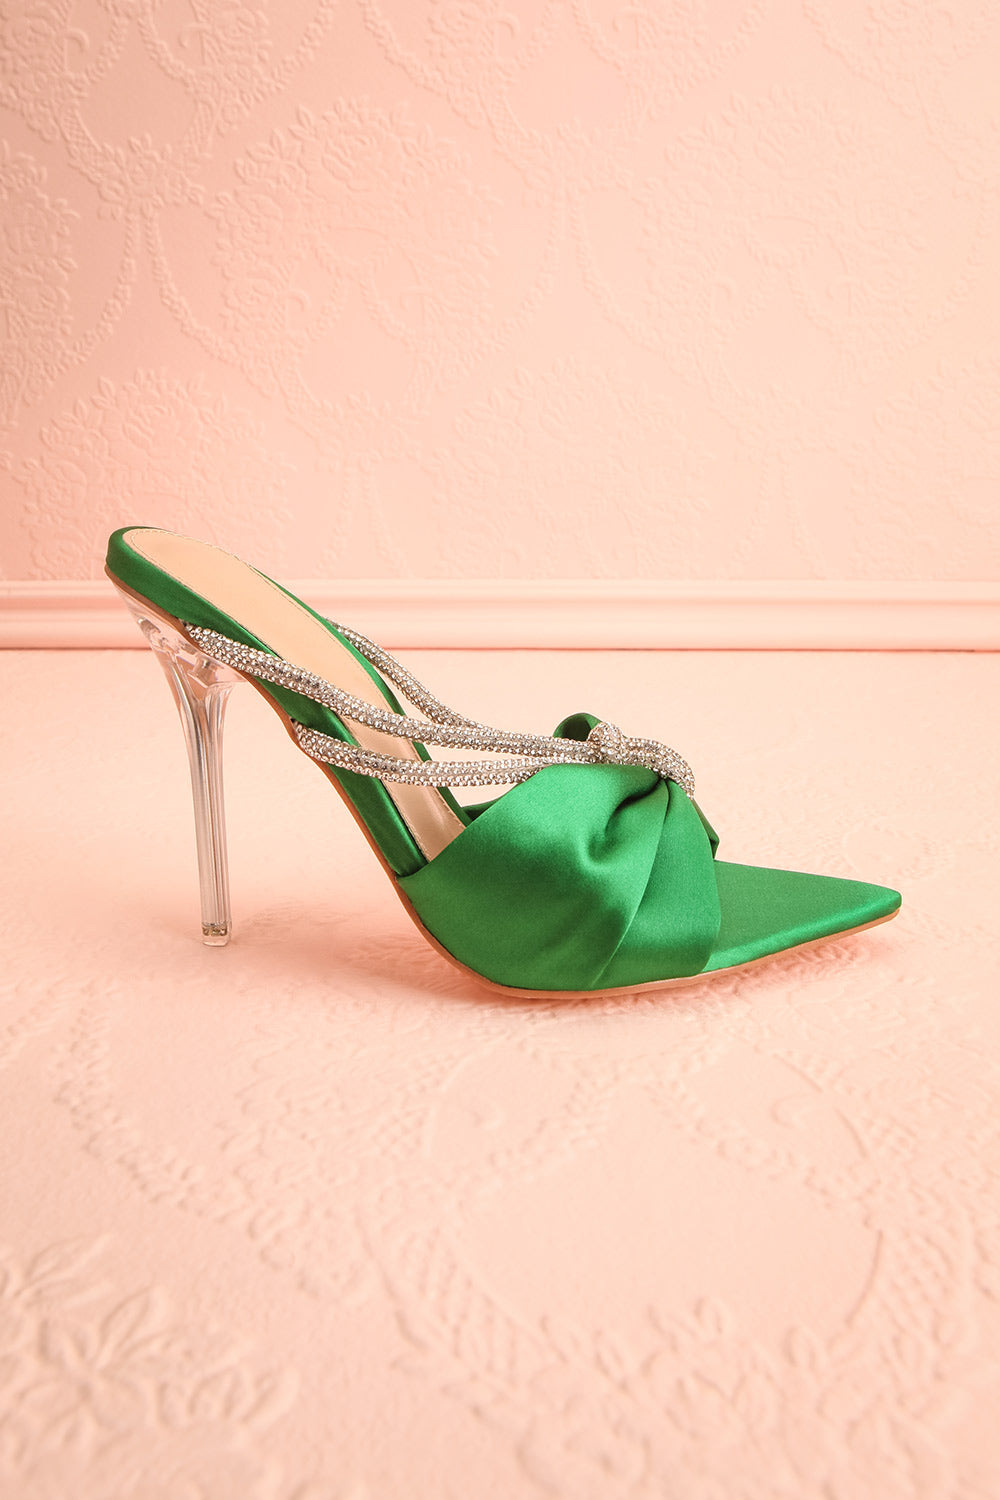 Chamaeleon Green Pointed-Toe Heels w/ Sequin Knot | Boutique 1861 side view